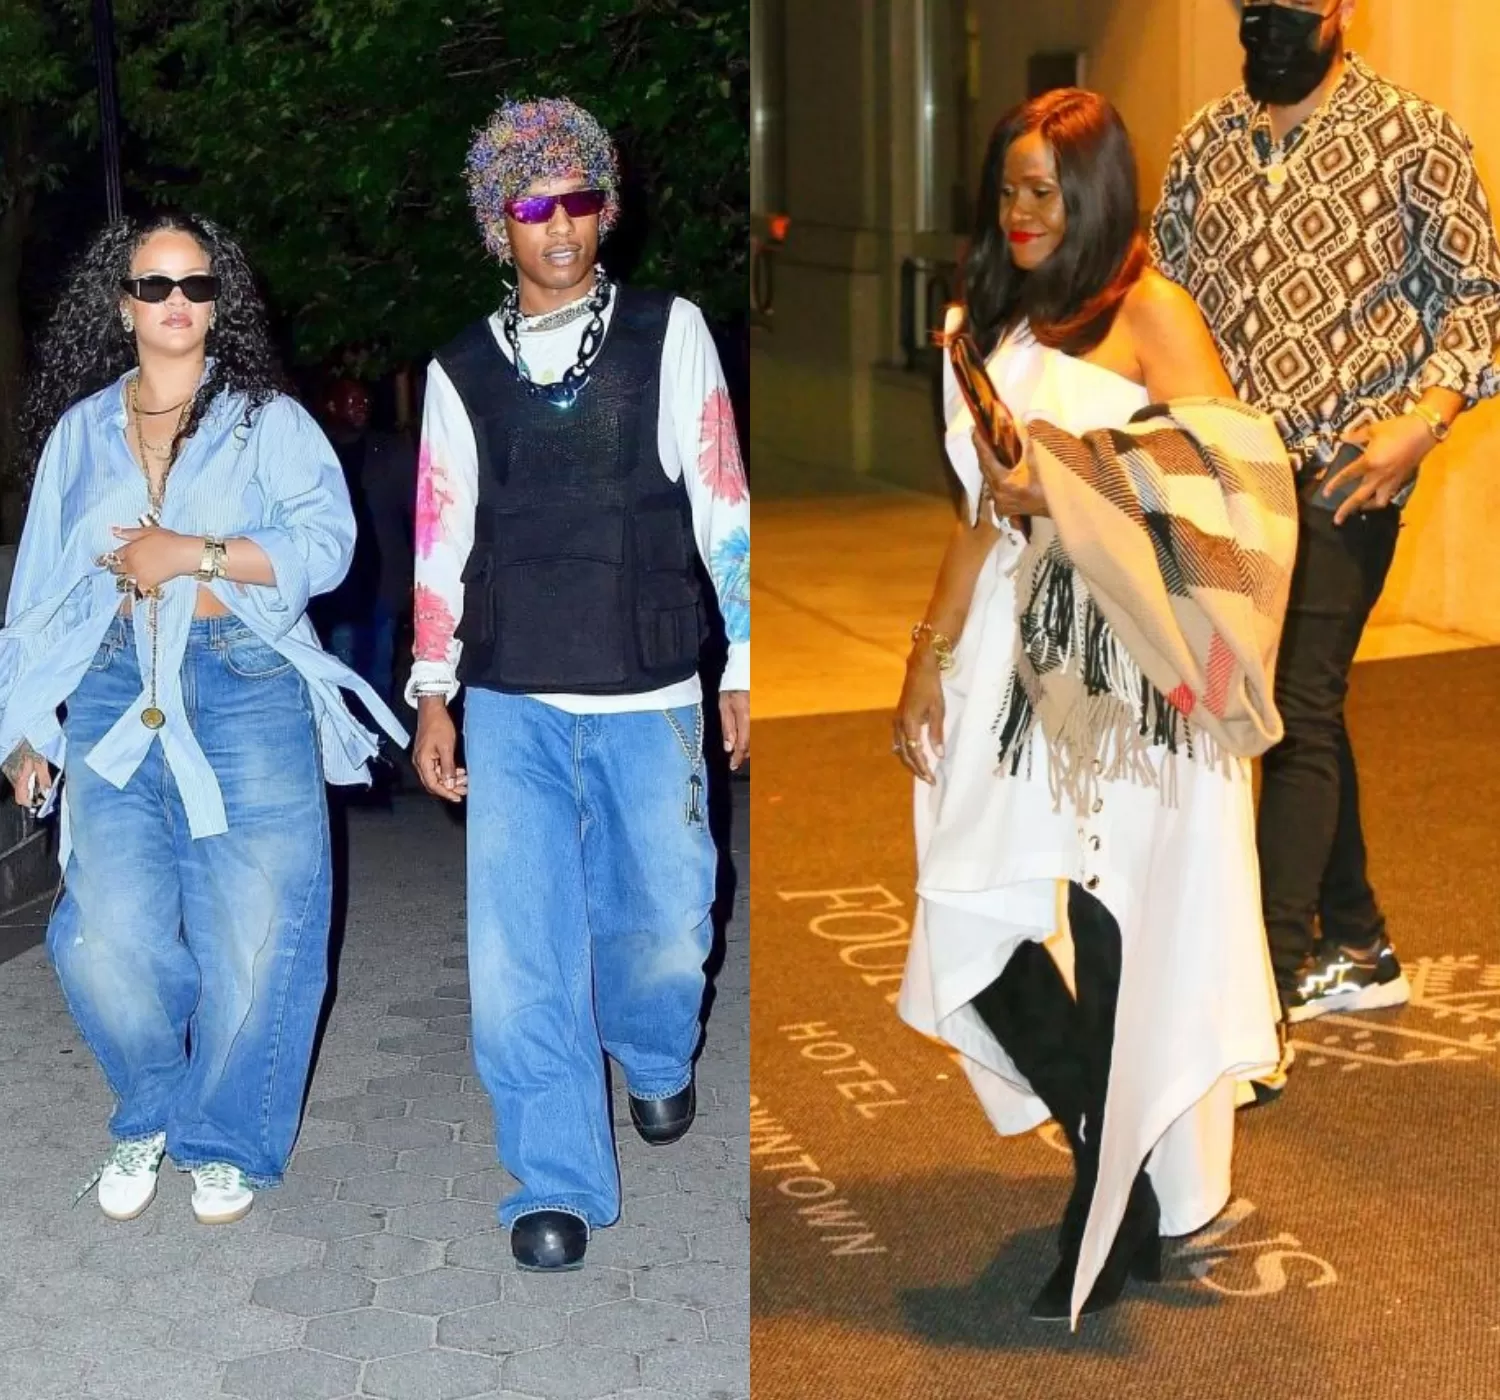 Cover Image for Rihanna Brings Her Mother Monica Along for Date Night With A$AP Rocky without RZA, Riot